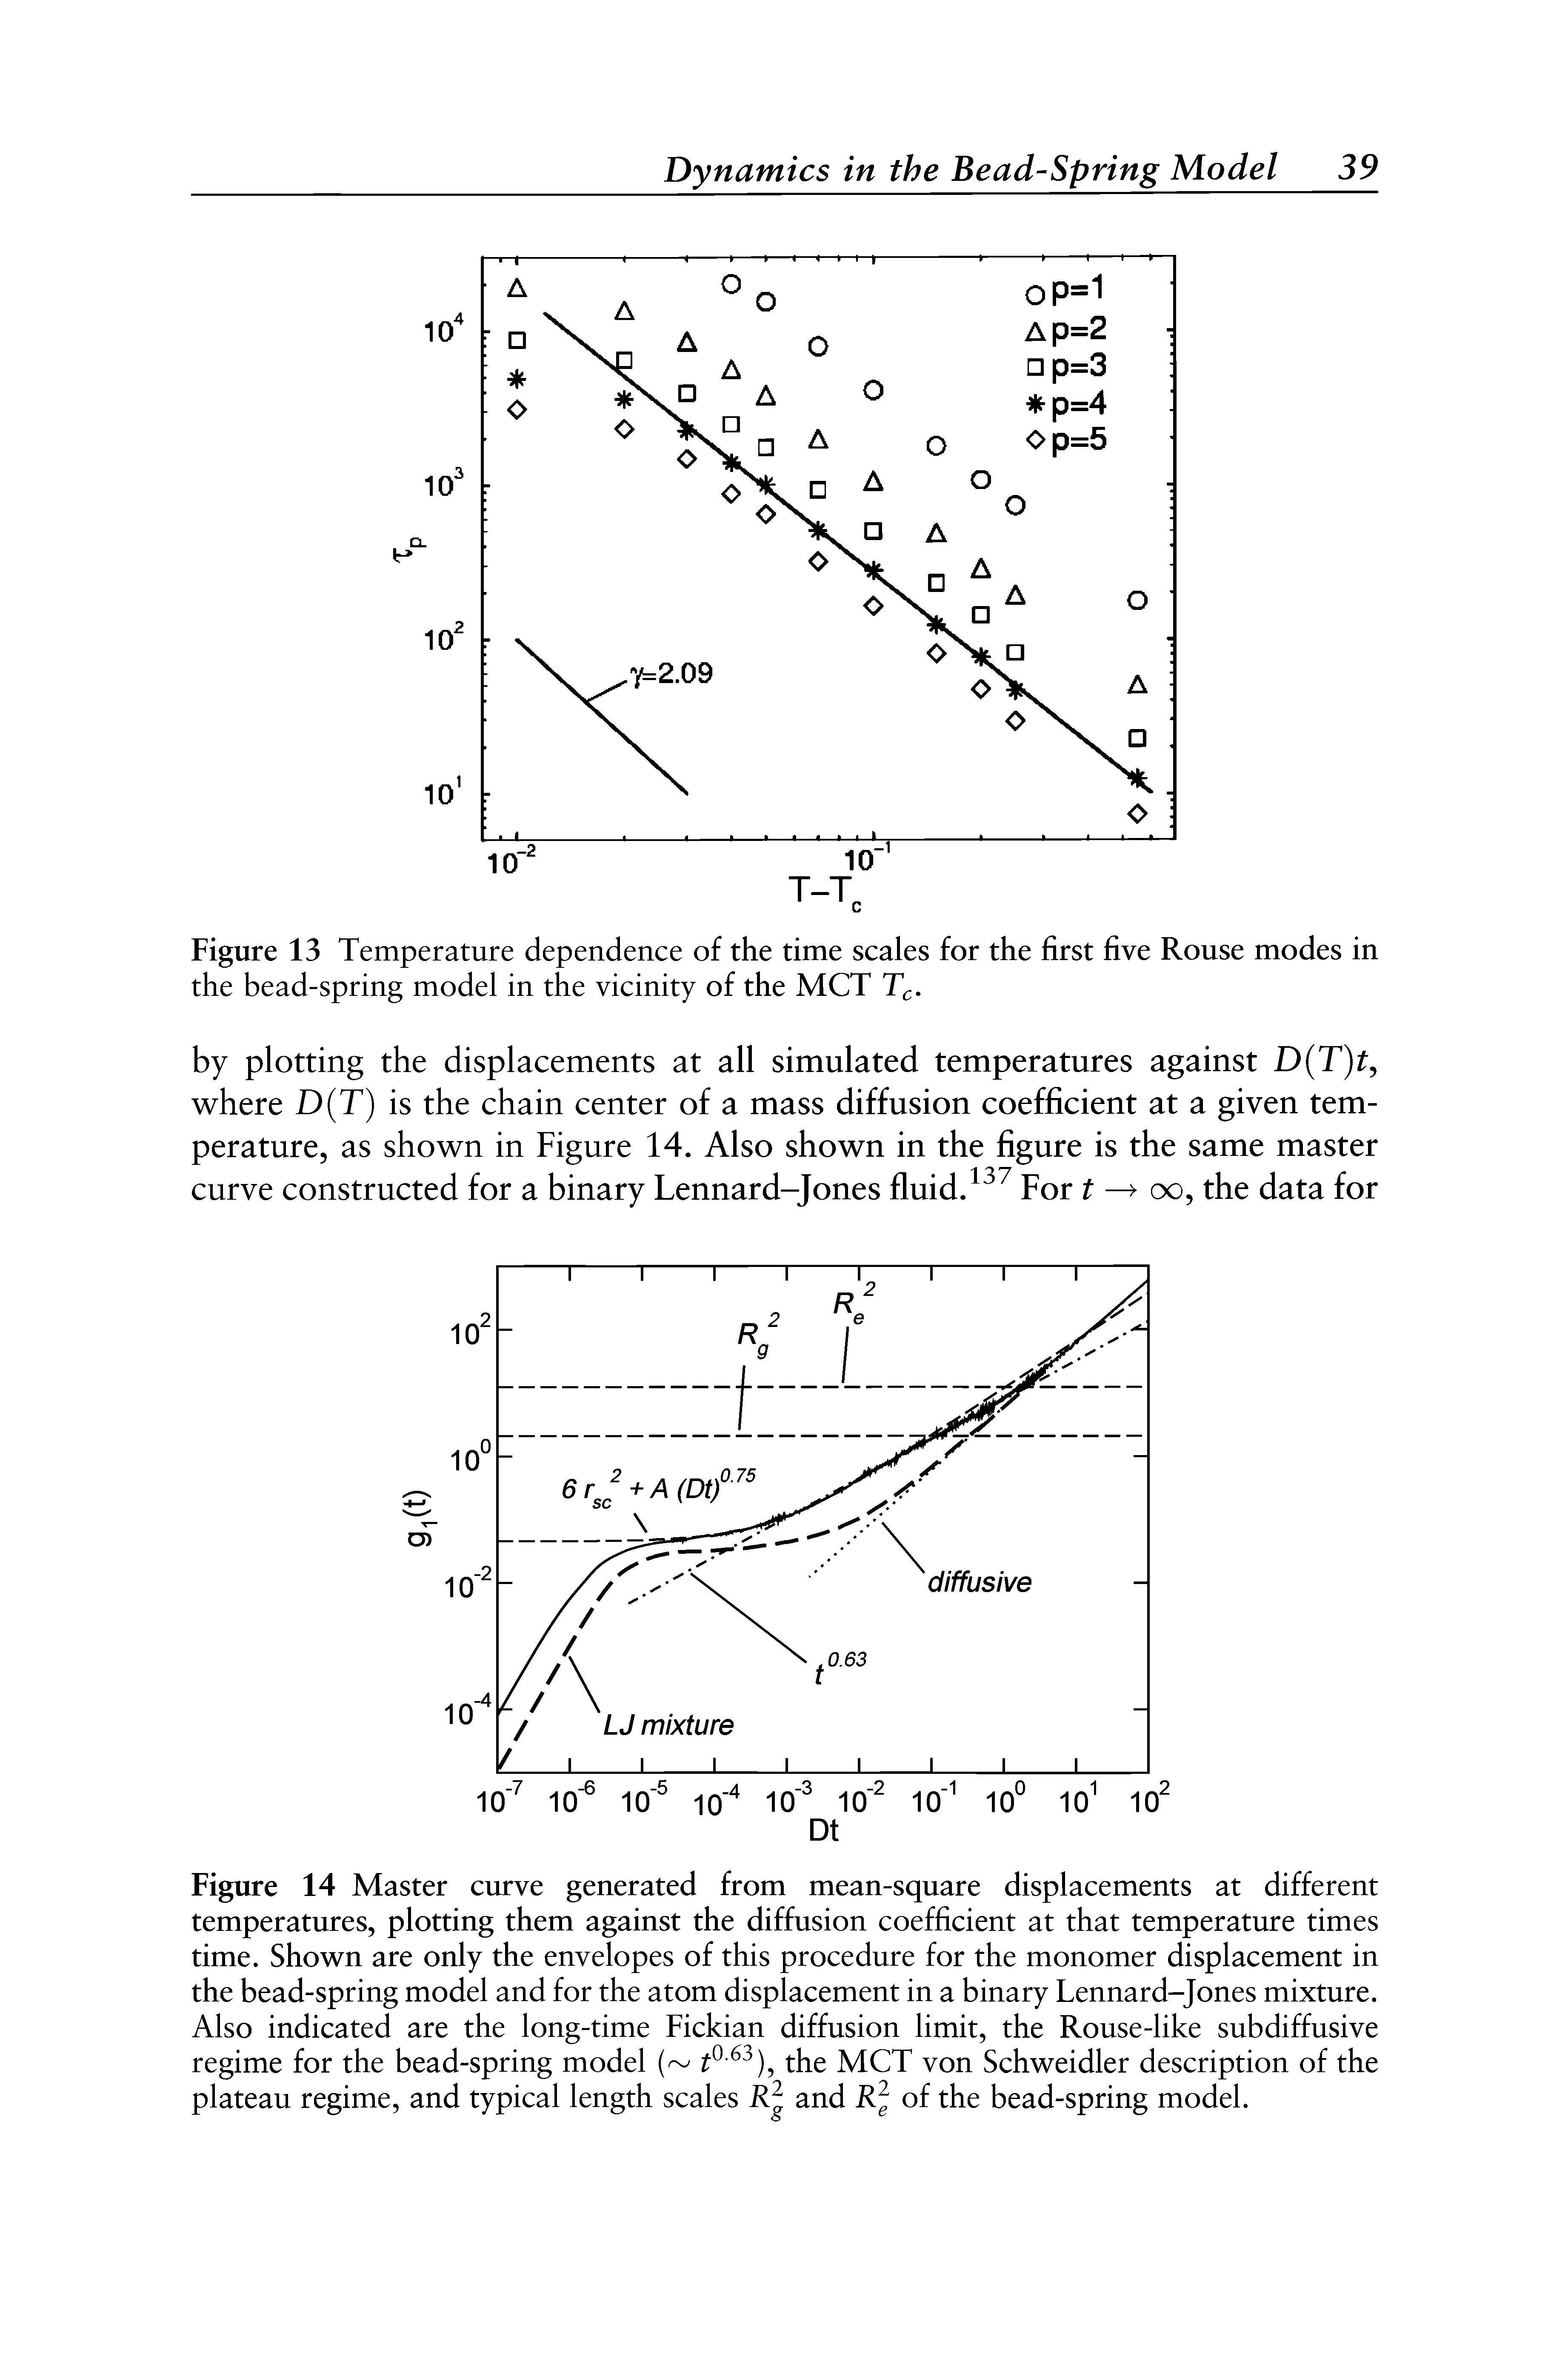 Figure 14 Master curve generated from mean-square displacements at different temperatures, plotting them against the diffusion coefficient at that temperature times time. Shown are only the envelopes of this procedure for the monomer displacement in the bead-spring model and for the atom displacement in a binary Lennard-Jones mixture. Also indicated are the long-time Fickian diffusion limit, the Rouse-like subdiffusive regime for the bead-spring model ( ° 63), the MCT von Schweidler description of the plateau regime, and typical length scales R2 and R2e of the bead-spring model.